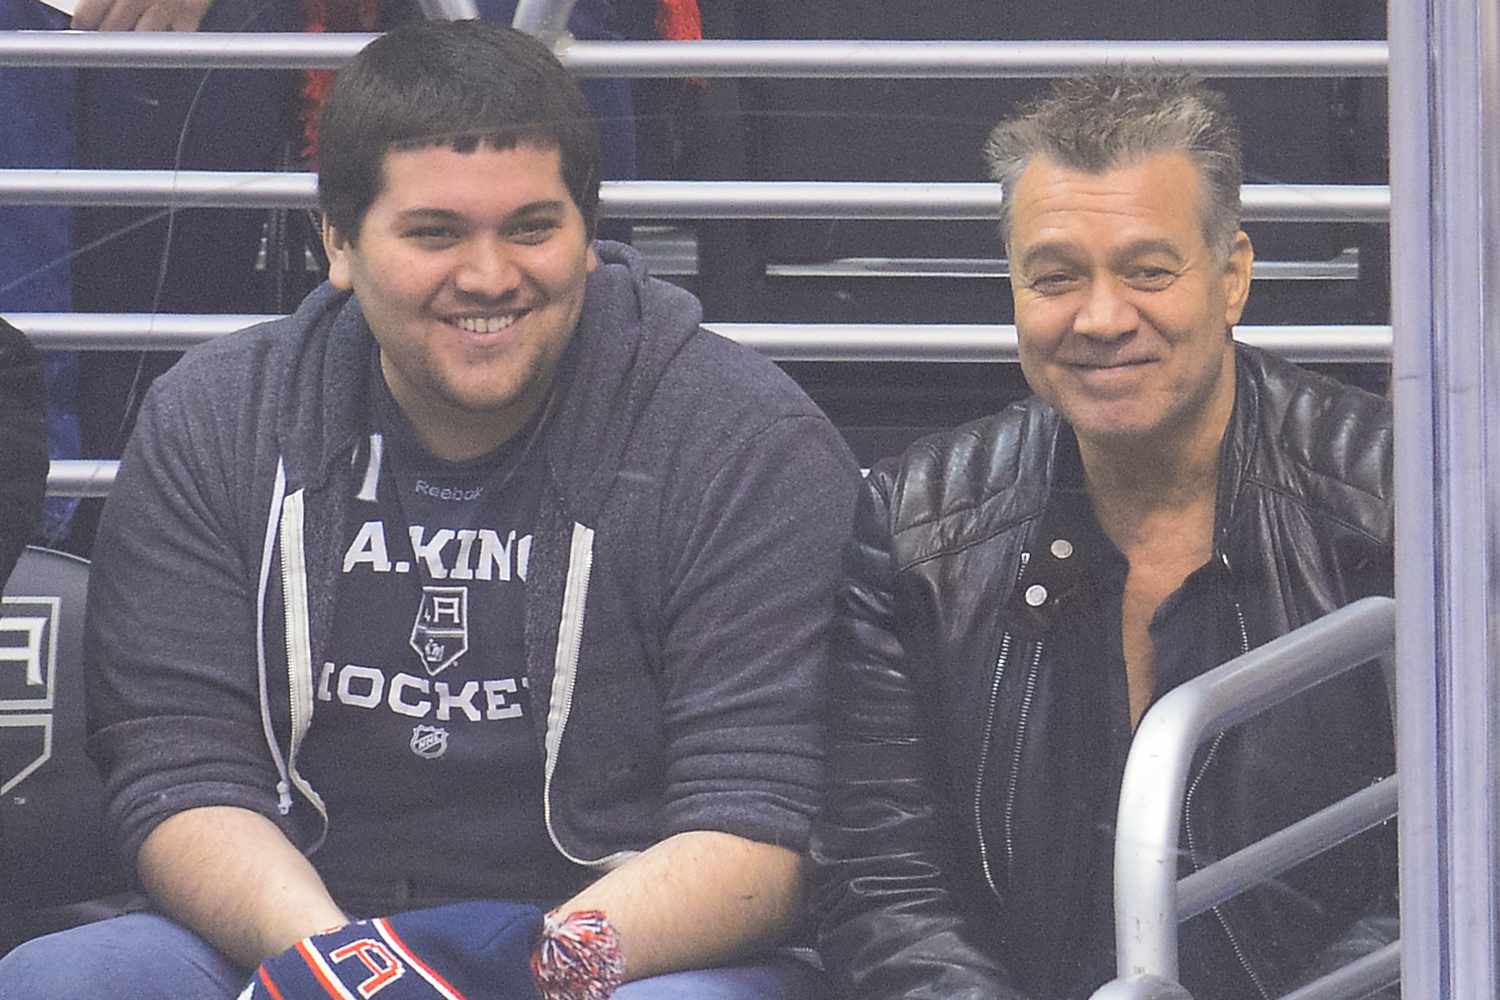 Wolfgang Van Halen Recalls Final Moments with Dad Eddie, Reveals Where He Keeps His Ashes